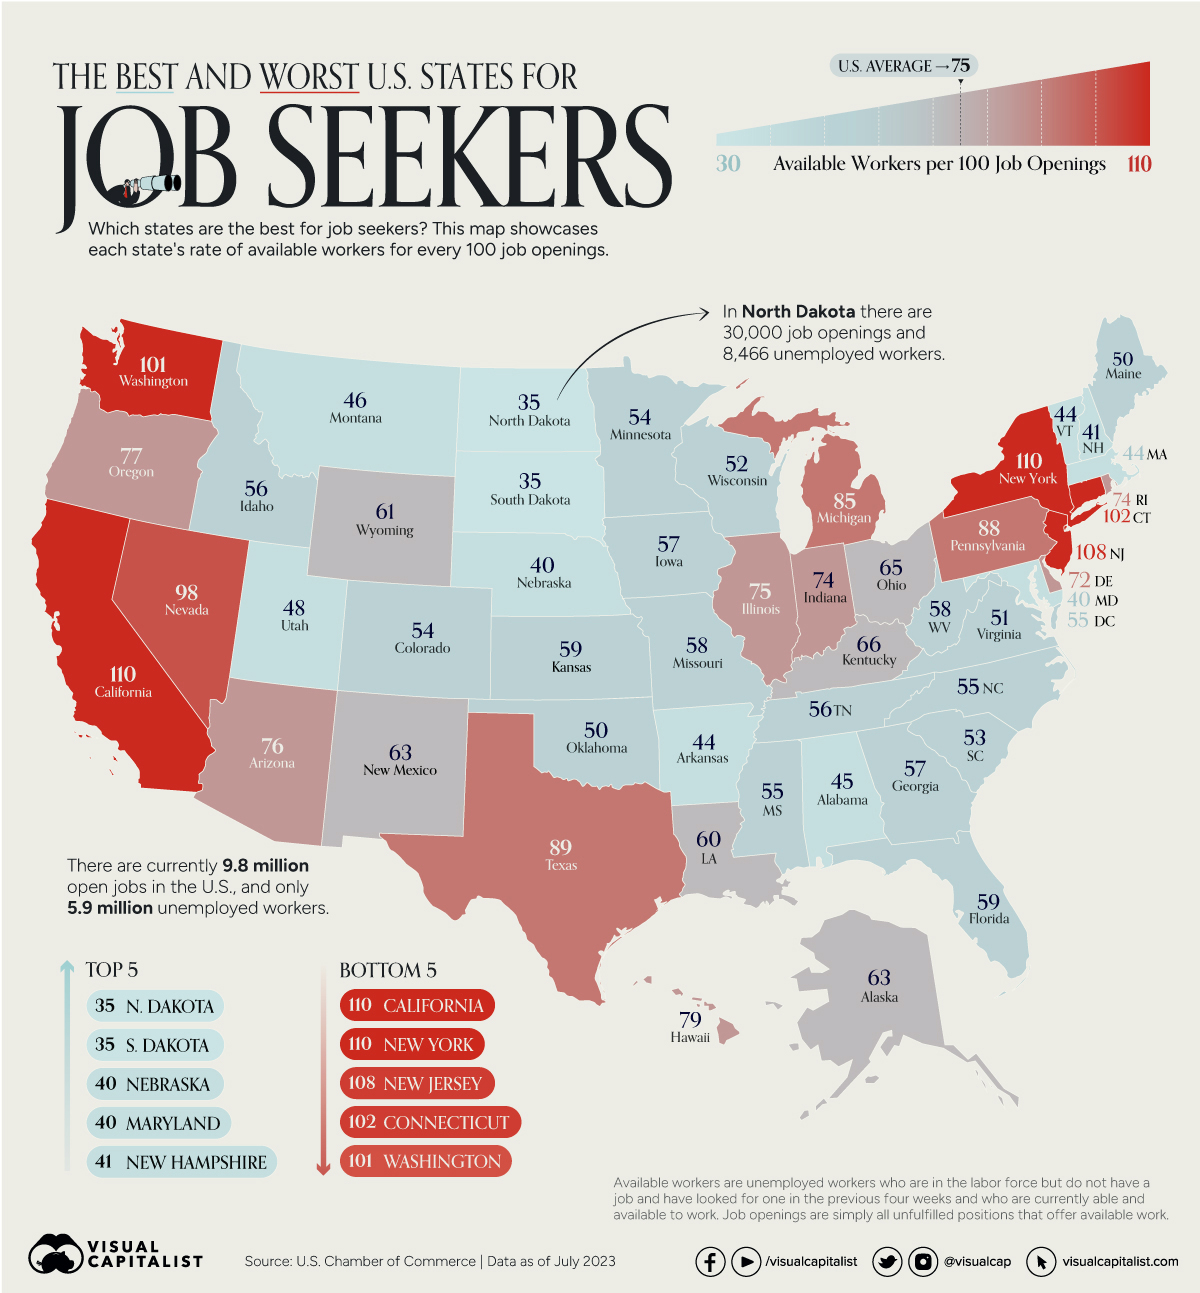 Mapped: The Best U.S. States for Jobs by Worker Availability